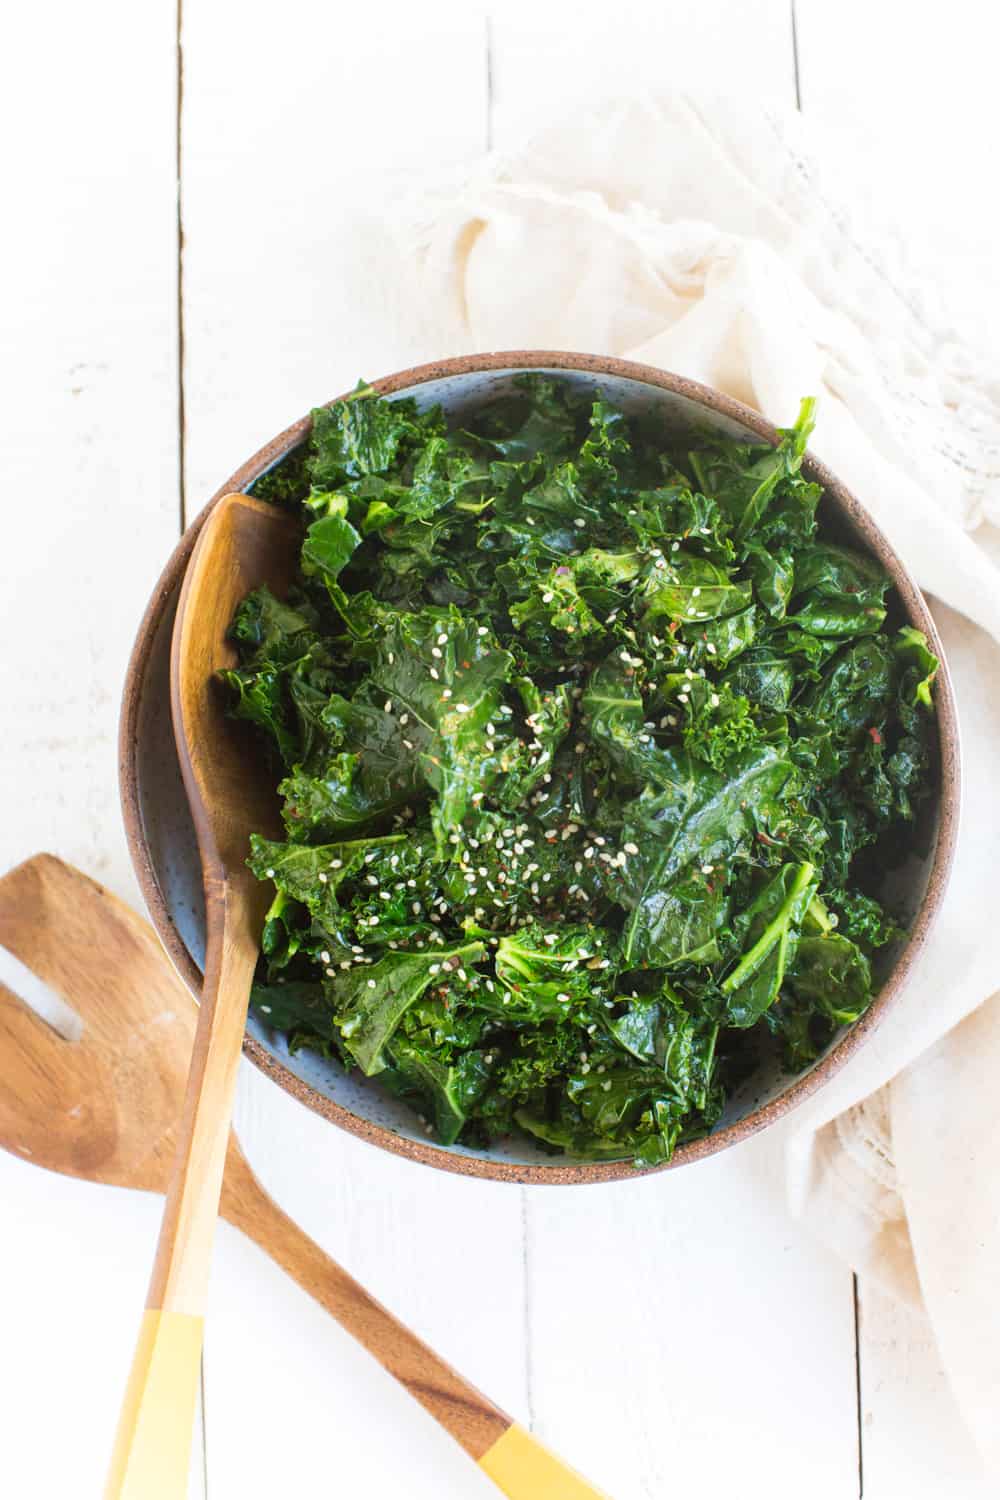 Bowl of Kale with Sesame with wooden serving spoons